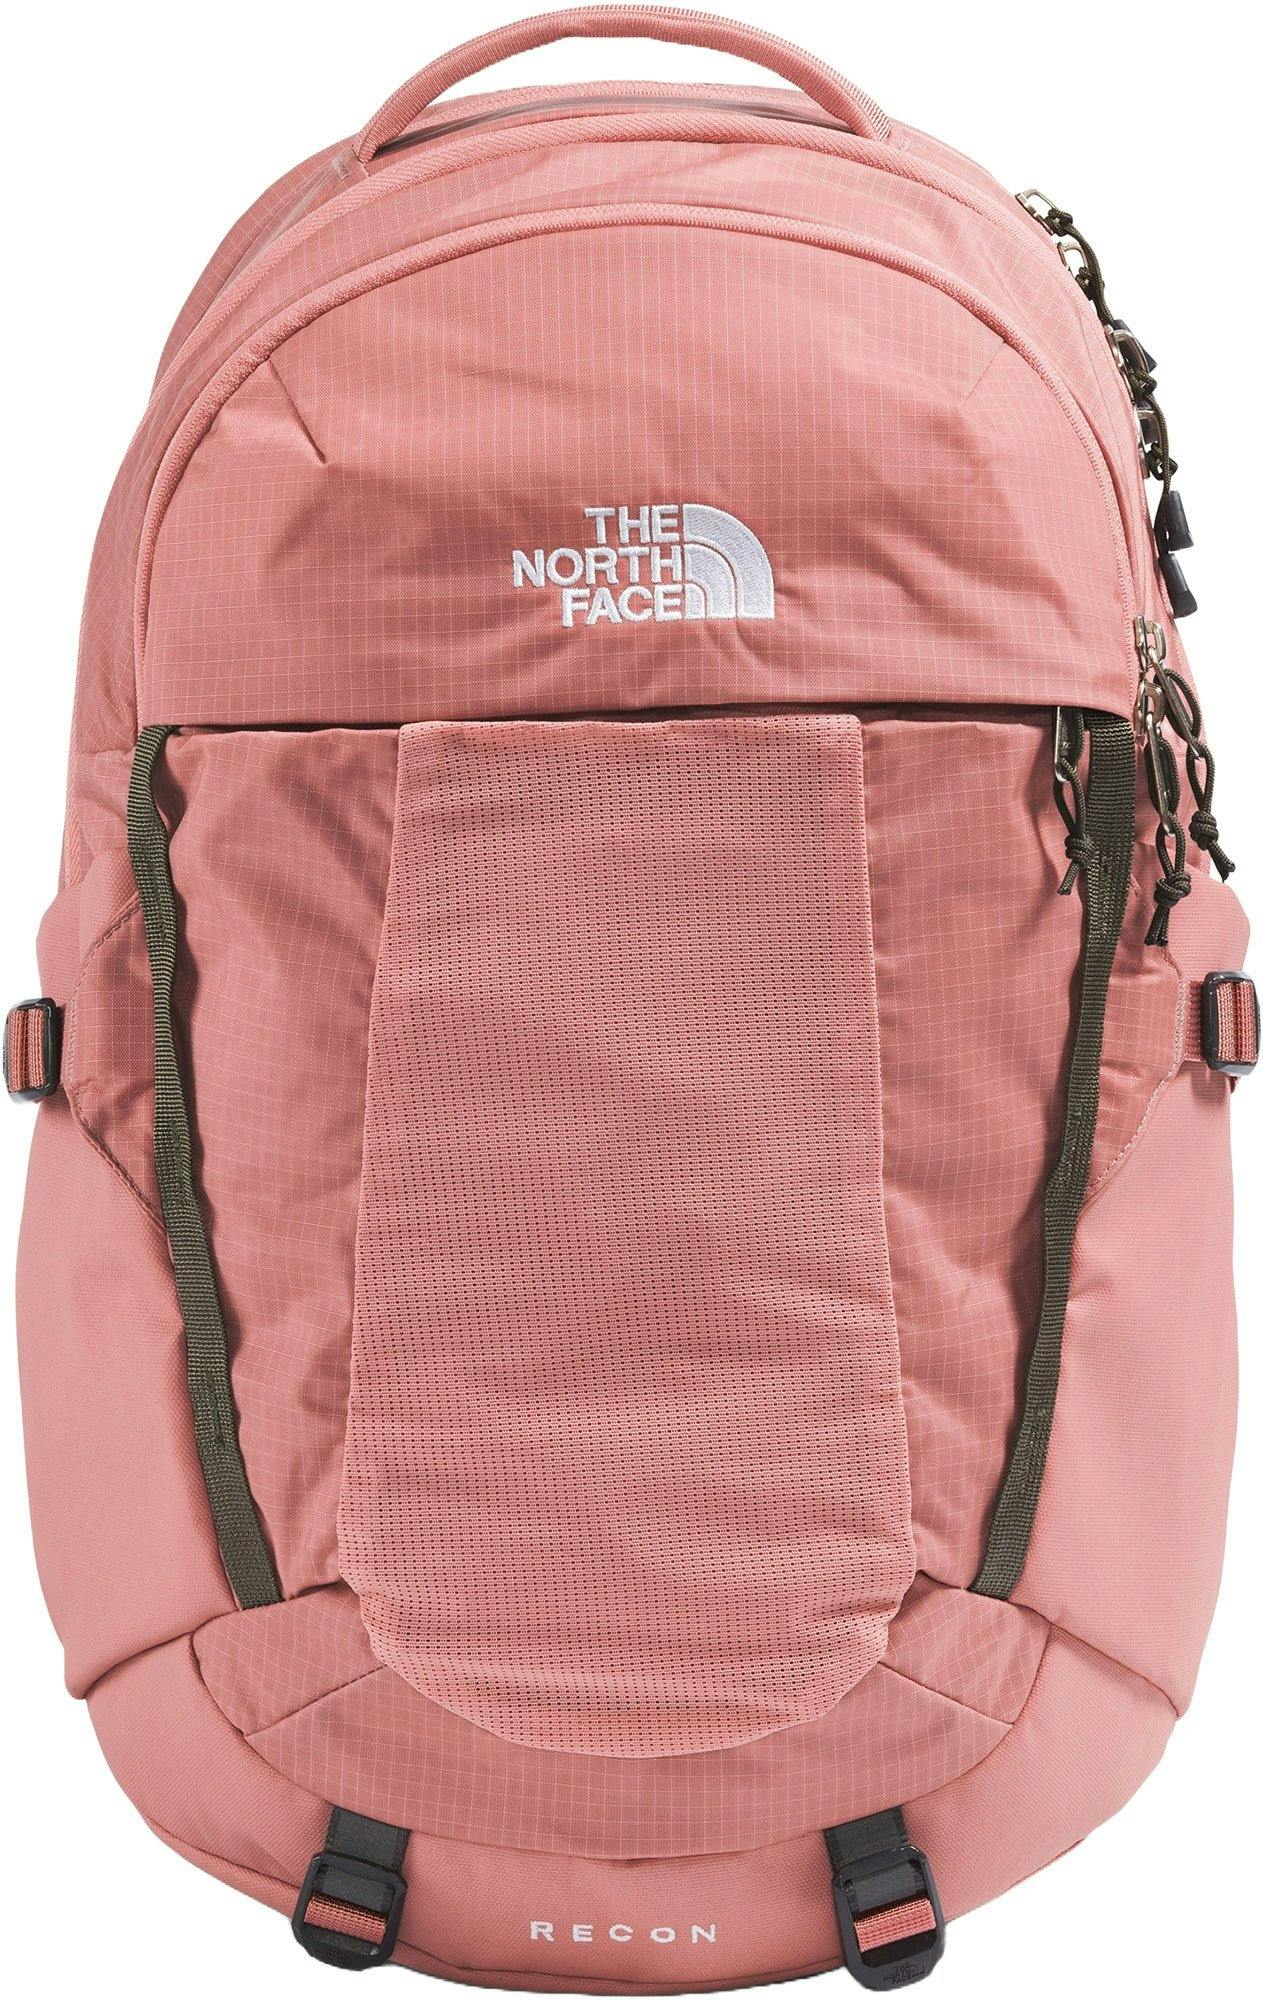 Product image for Recon Backpack 30L - Women’s